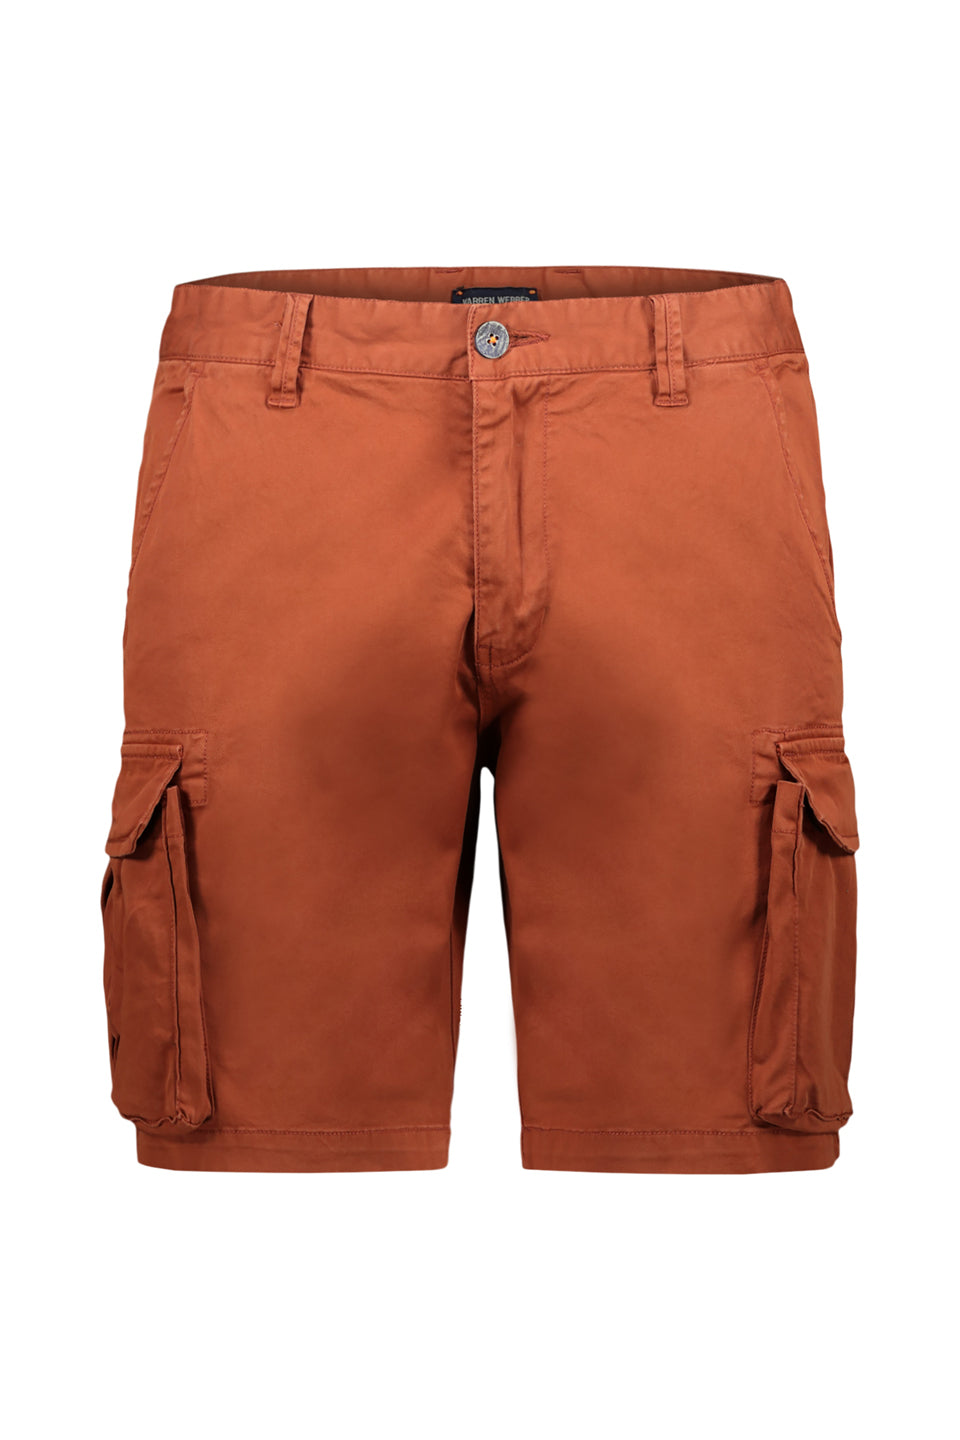 Fitted Cargo Shorts In Tangerine